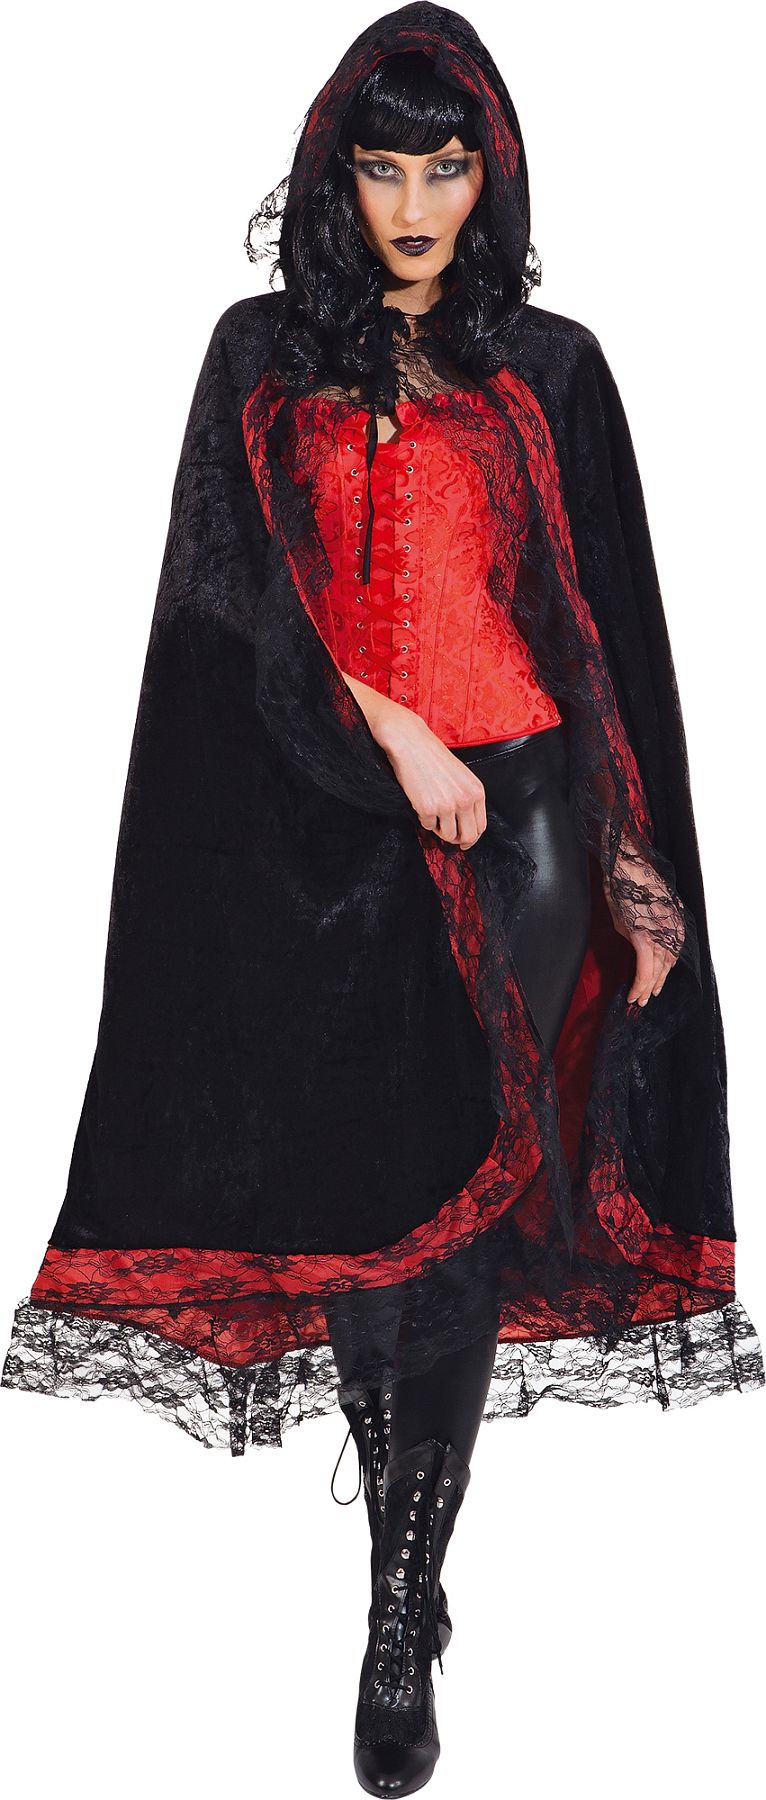 Cape black-red with lace